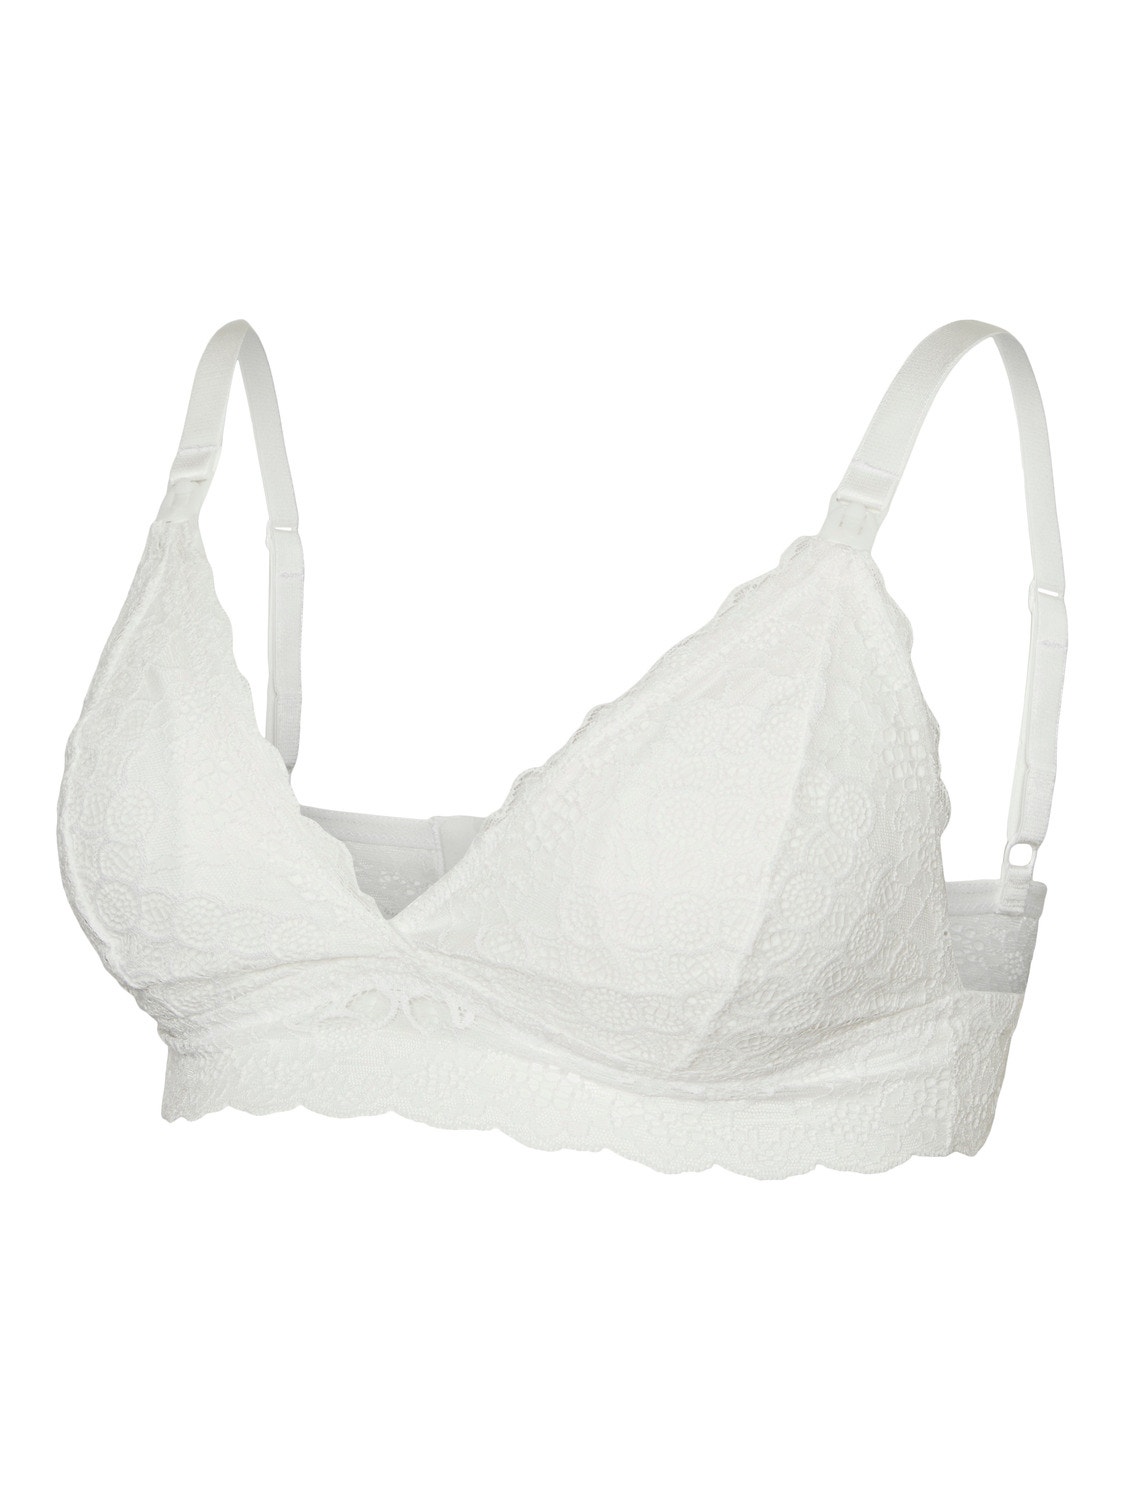 Jual Mothercare Mothercare nude and white soft cup nursing bras